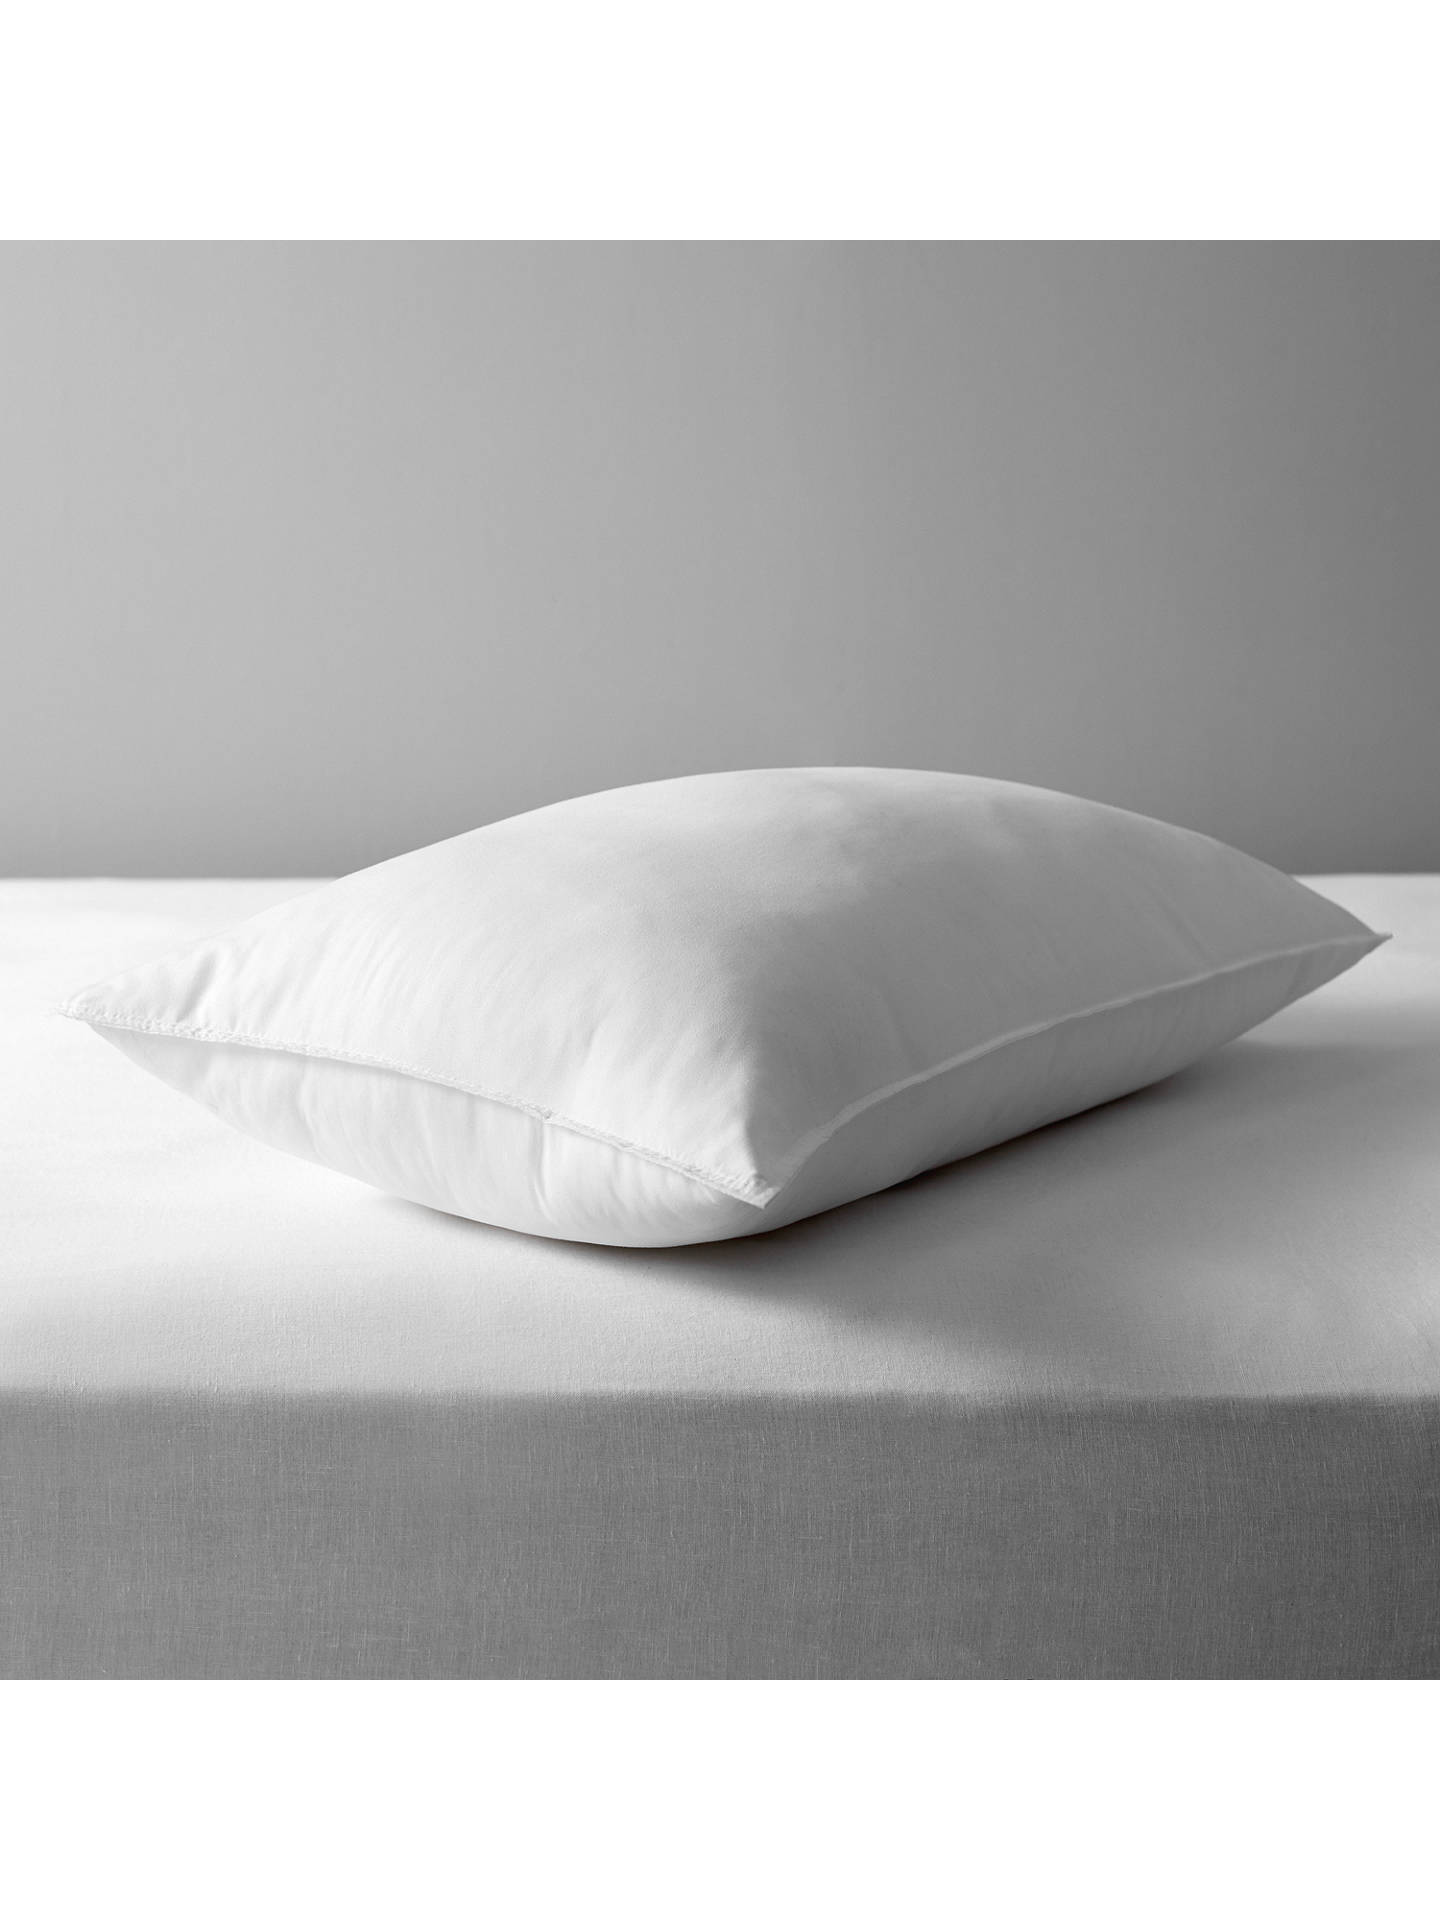 John Lewis &amp; Partners Synthetic Soft Touch Washable Standard Pillow, Medium/Firm | £10